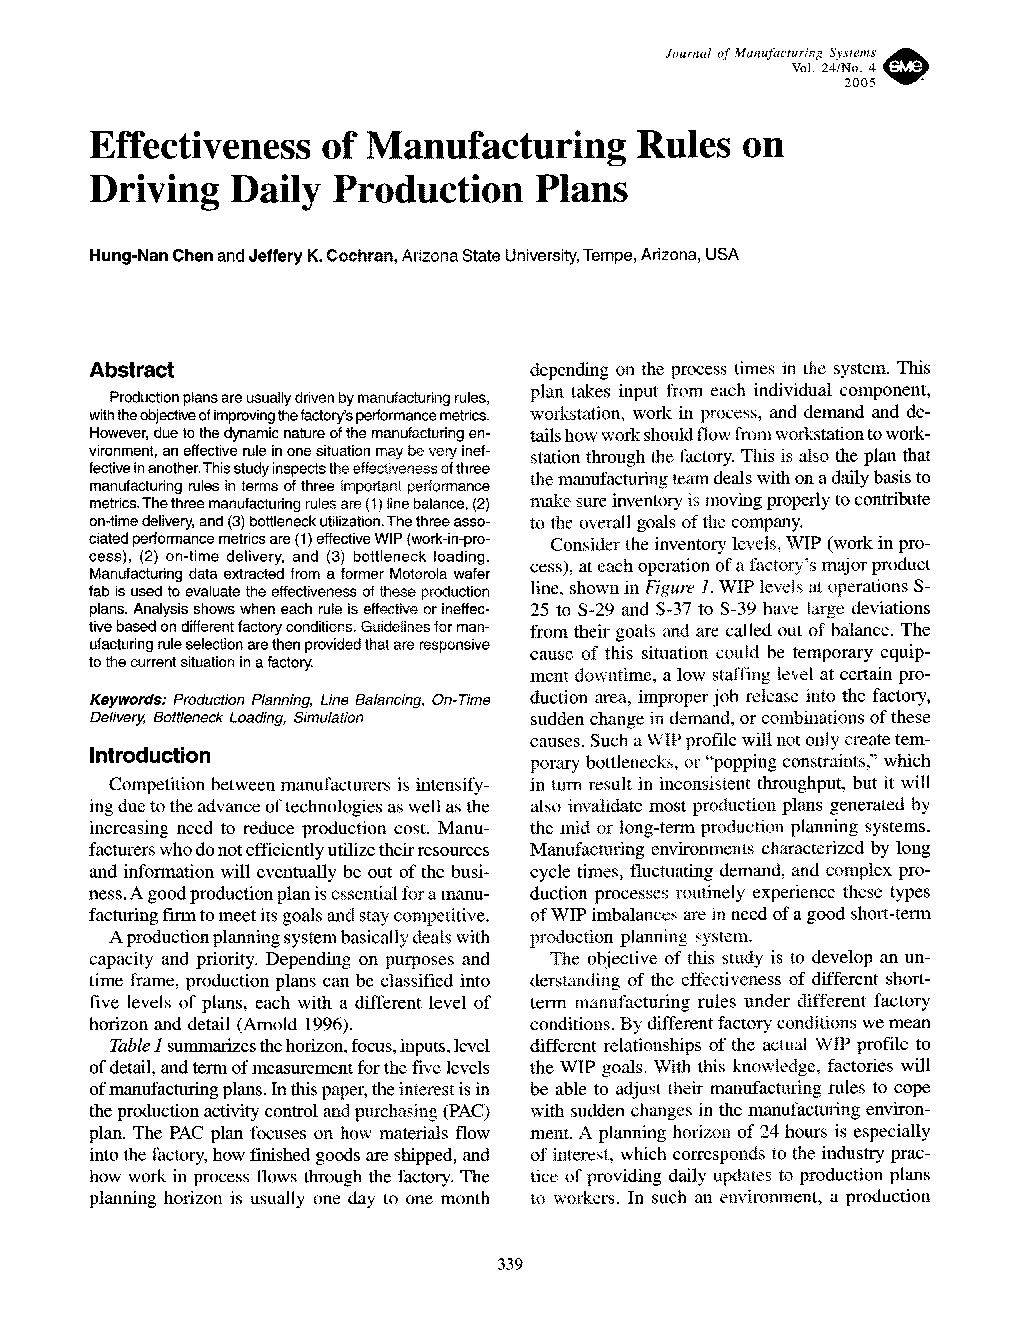 Effectiveness of manufacturing rules on driving daily production plans